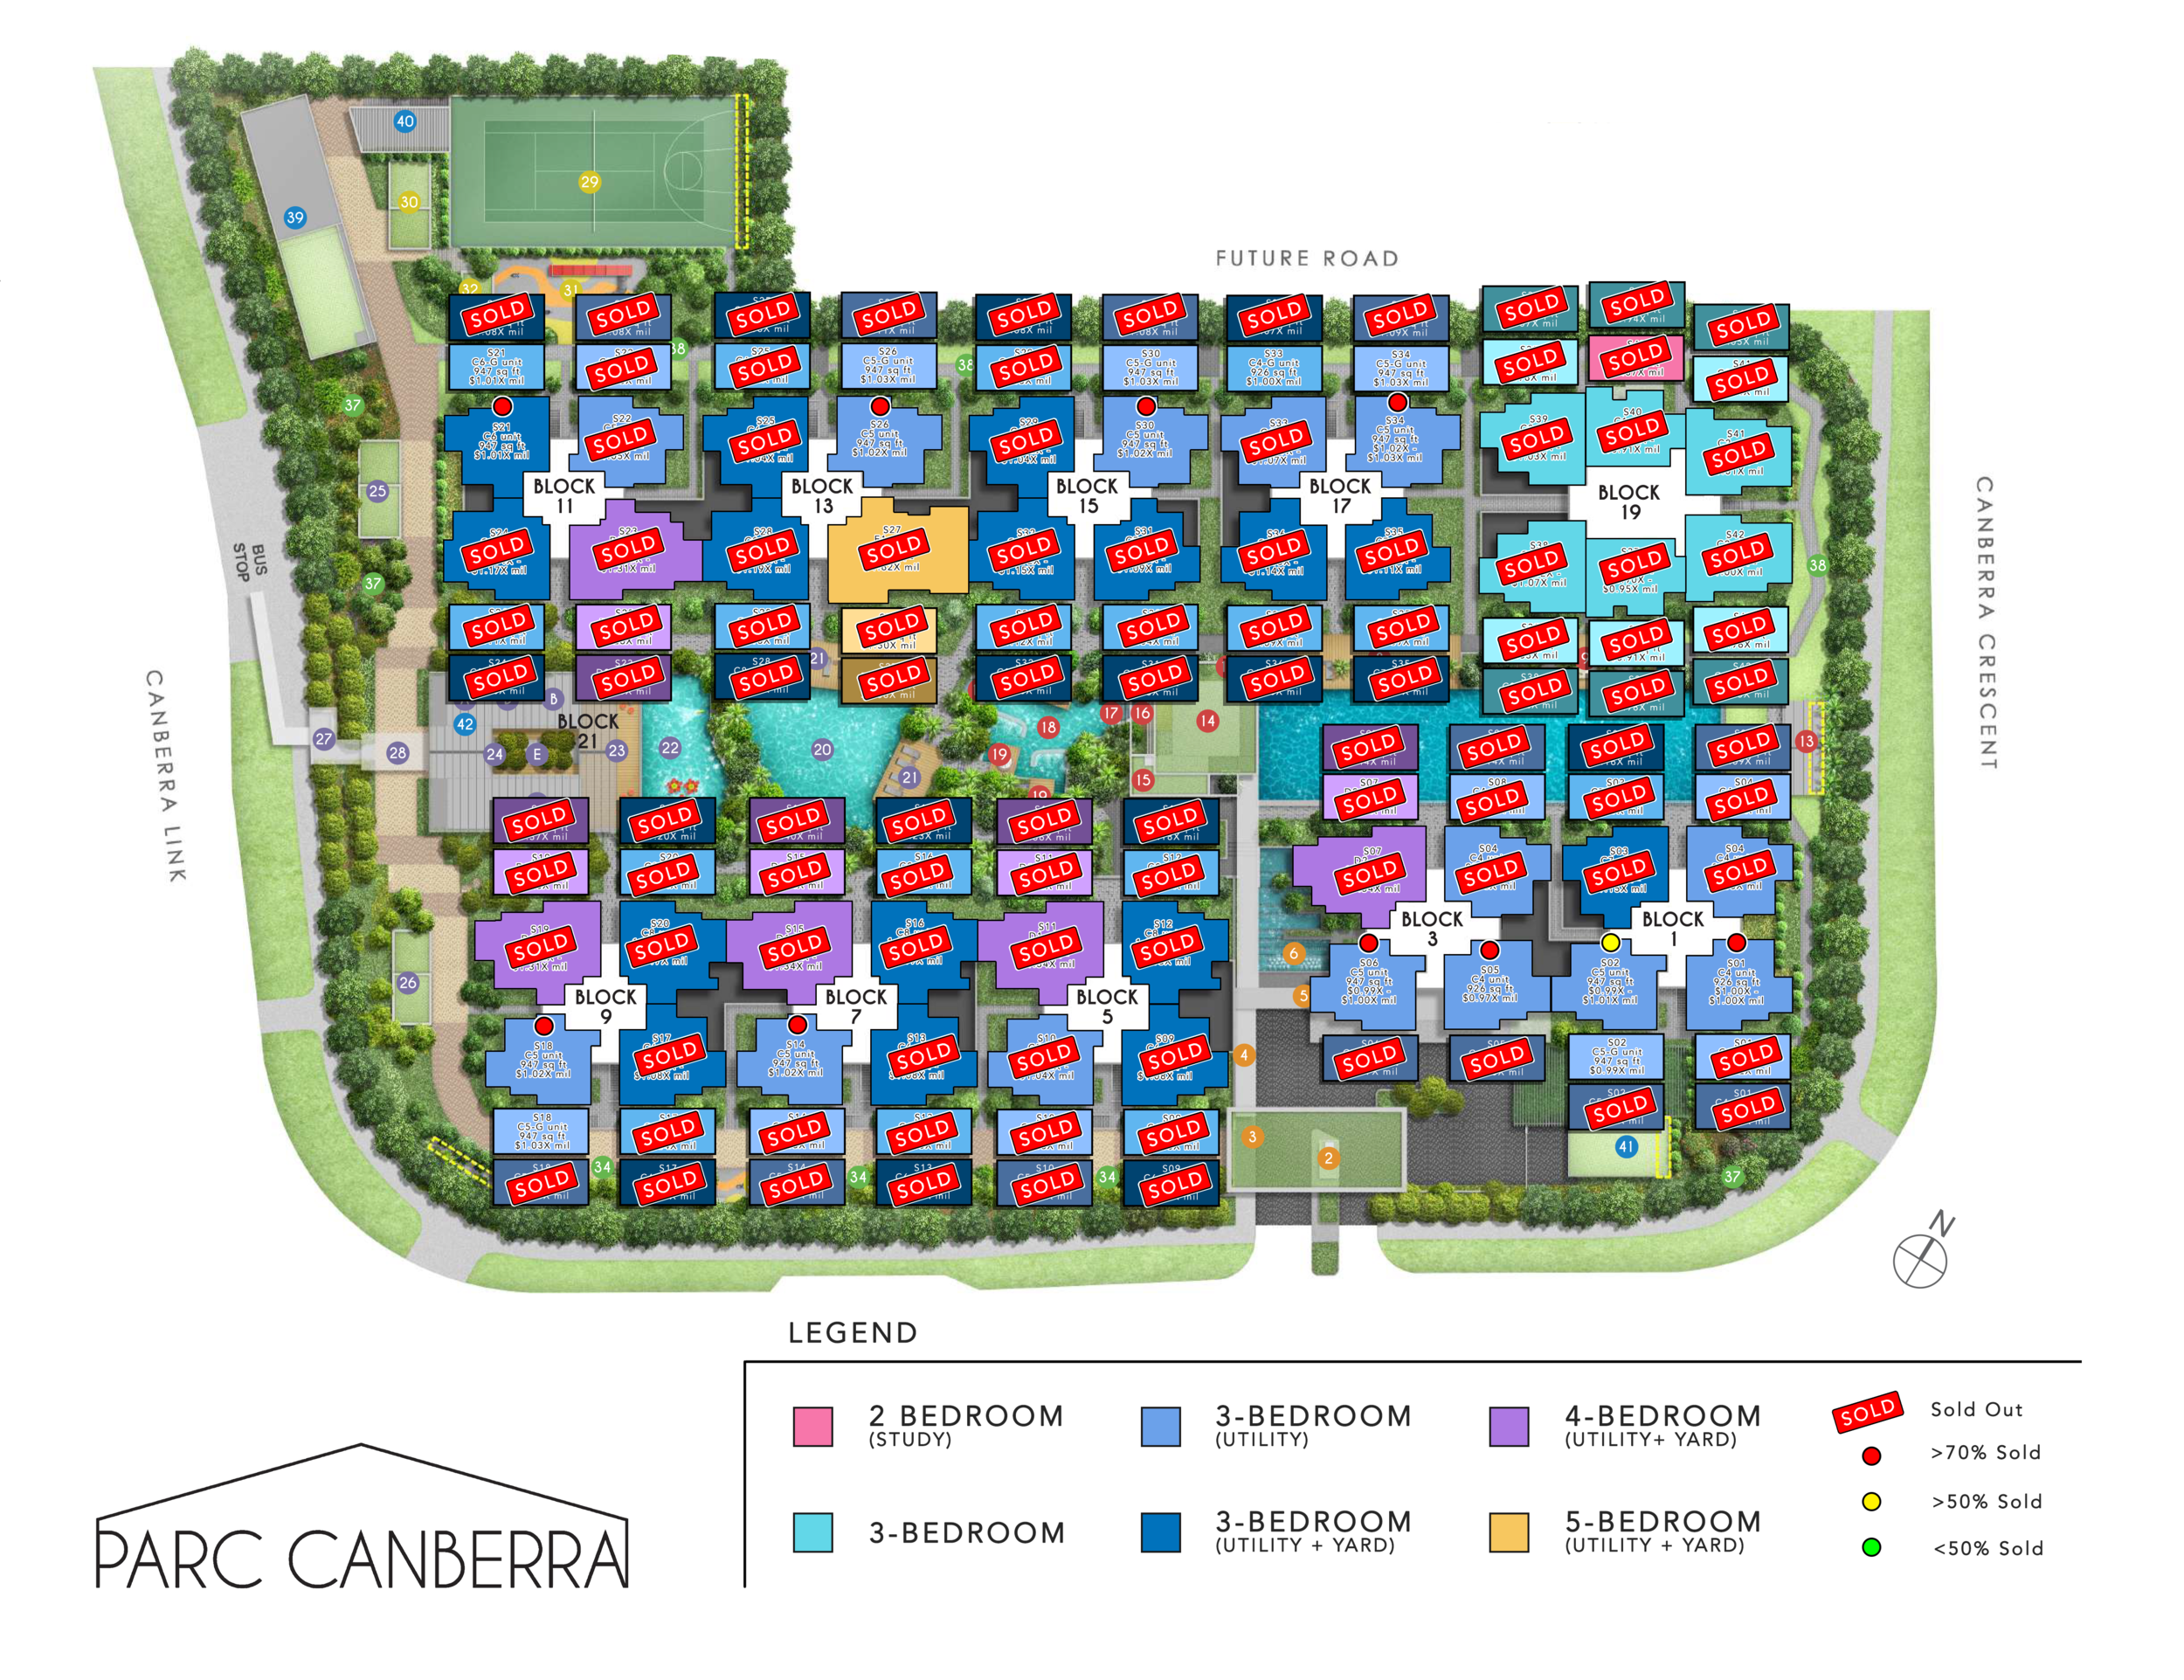 Sale Status Parc Canberra Price Map.png